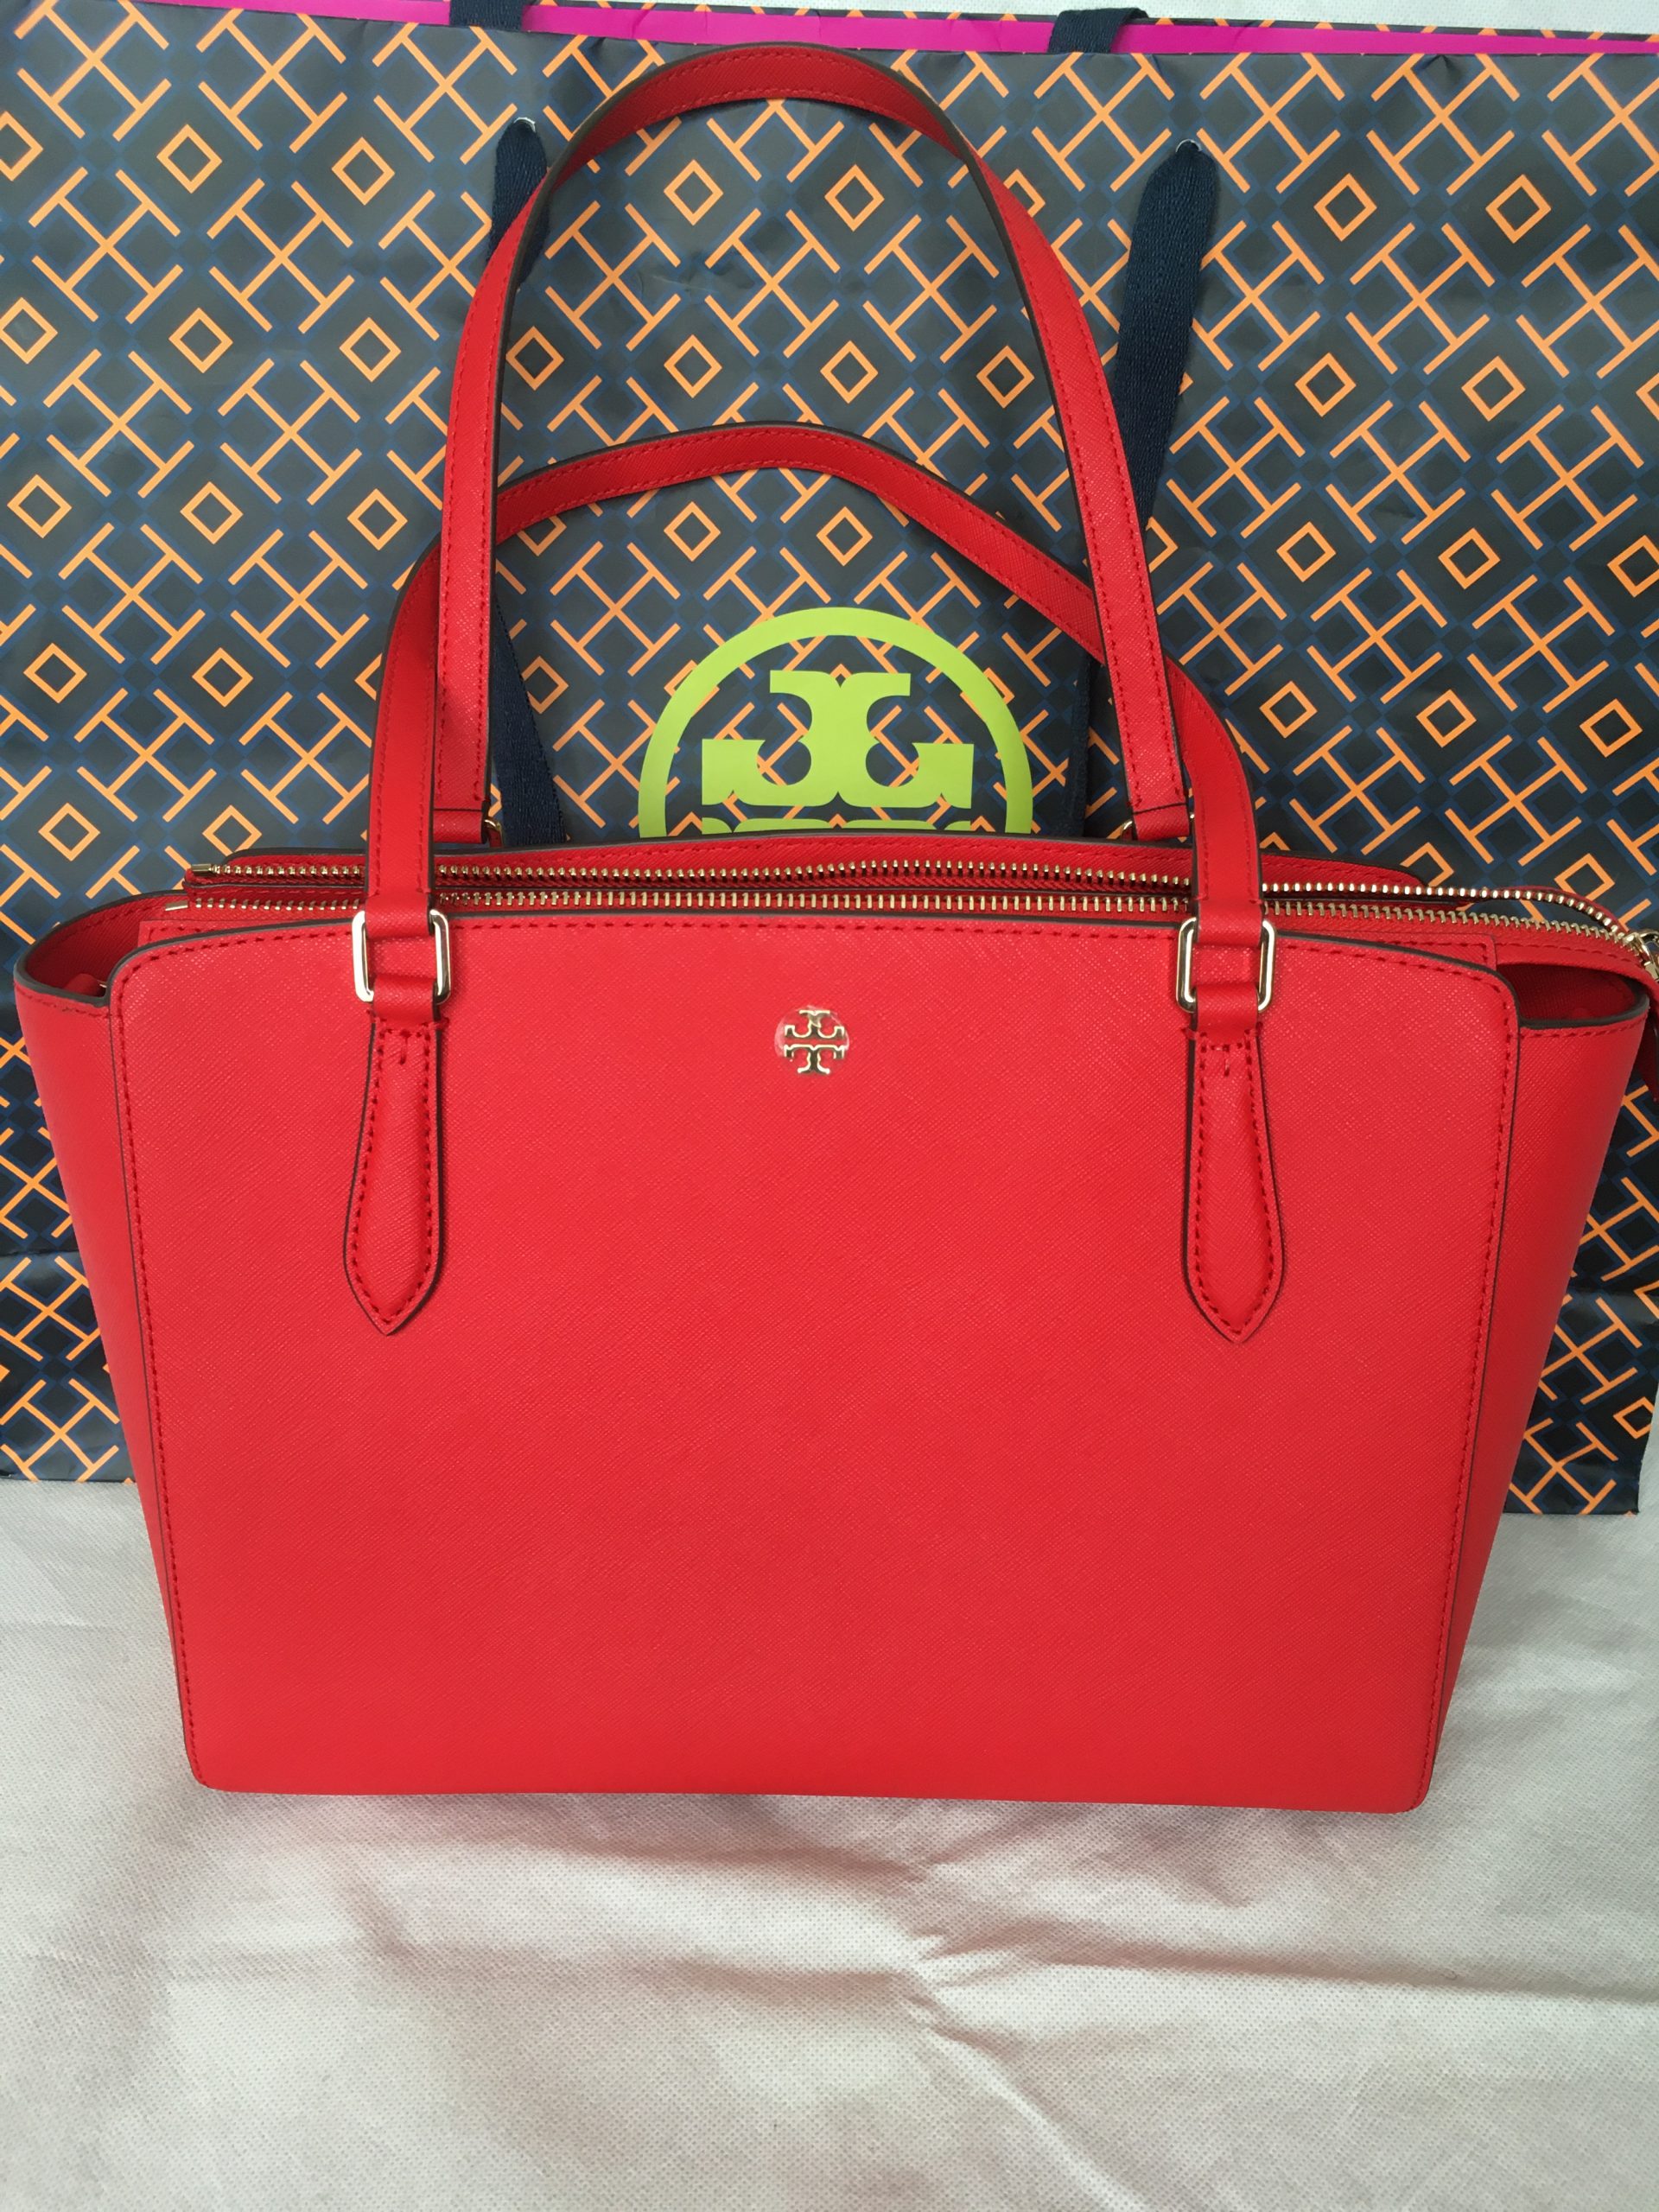 Tory Burch, Bags, Tory Burch Small Emerson Tote